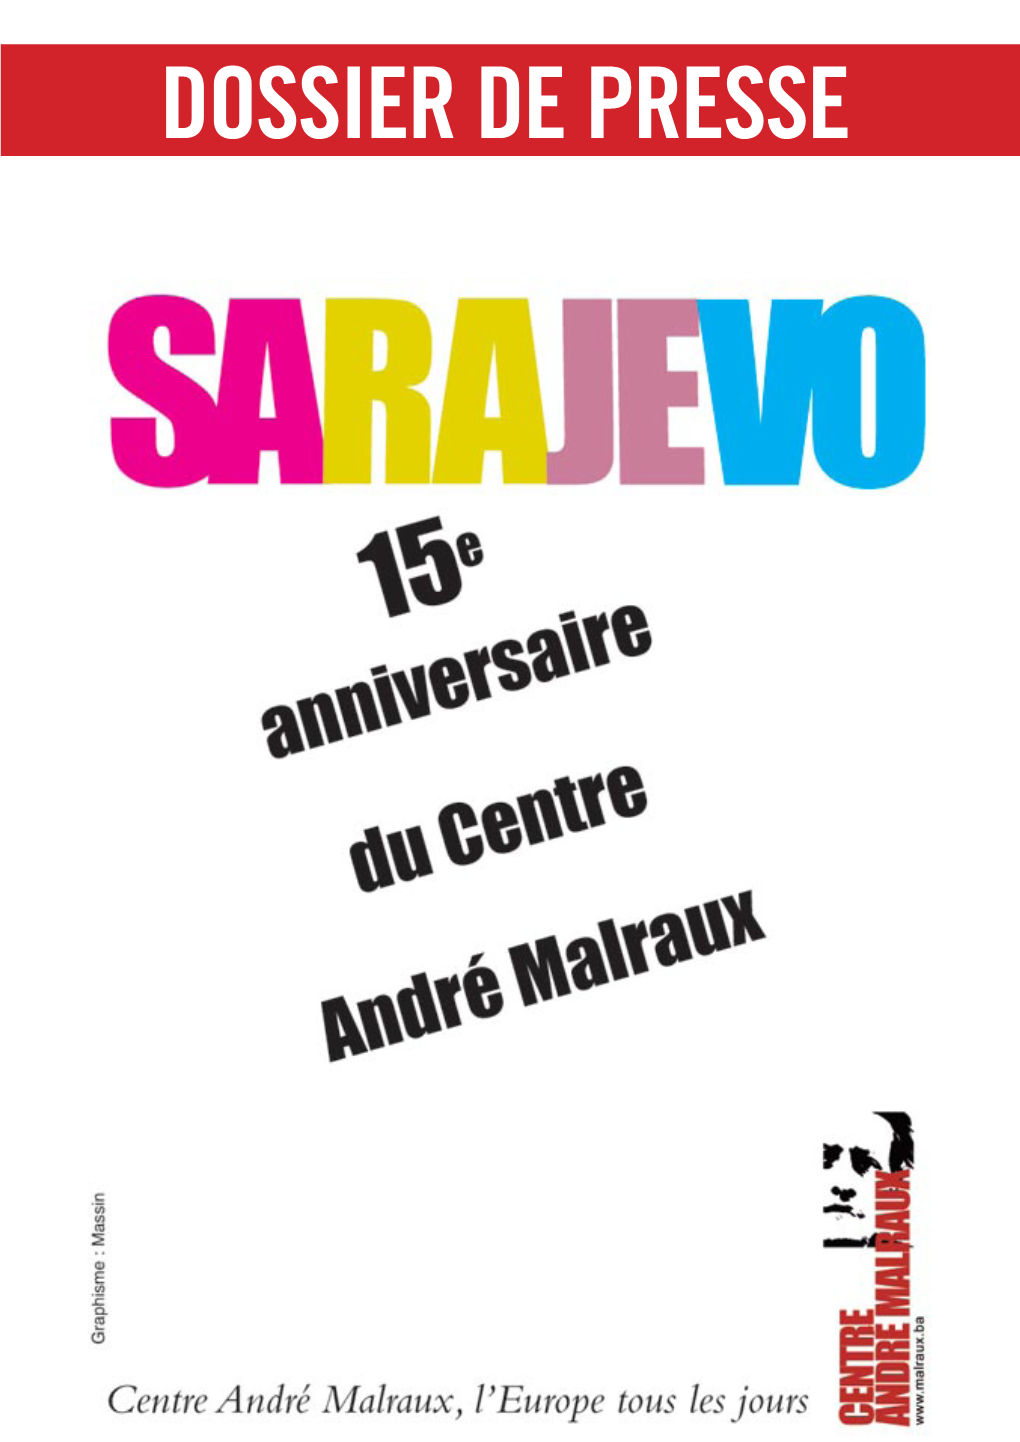 DP 15Ans Centre Andre Malraux.Indd